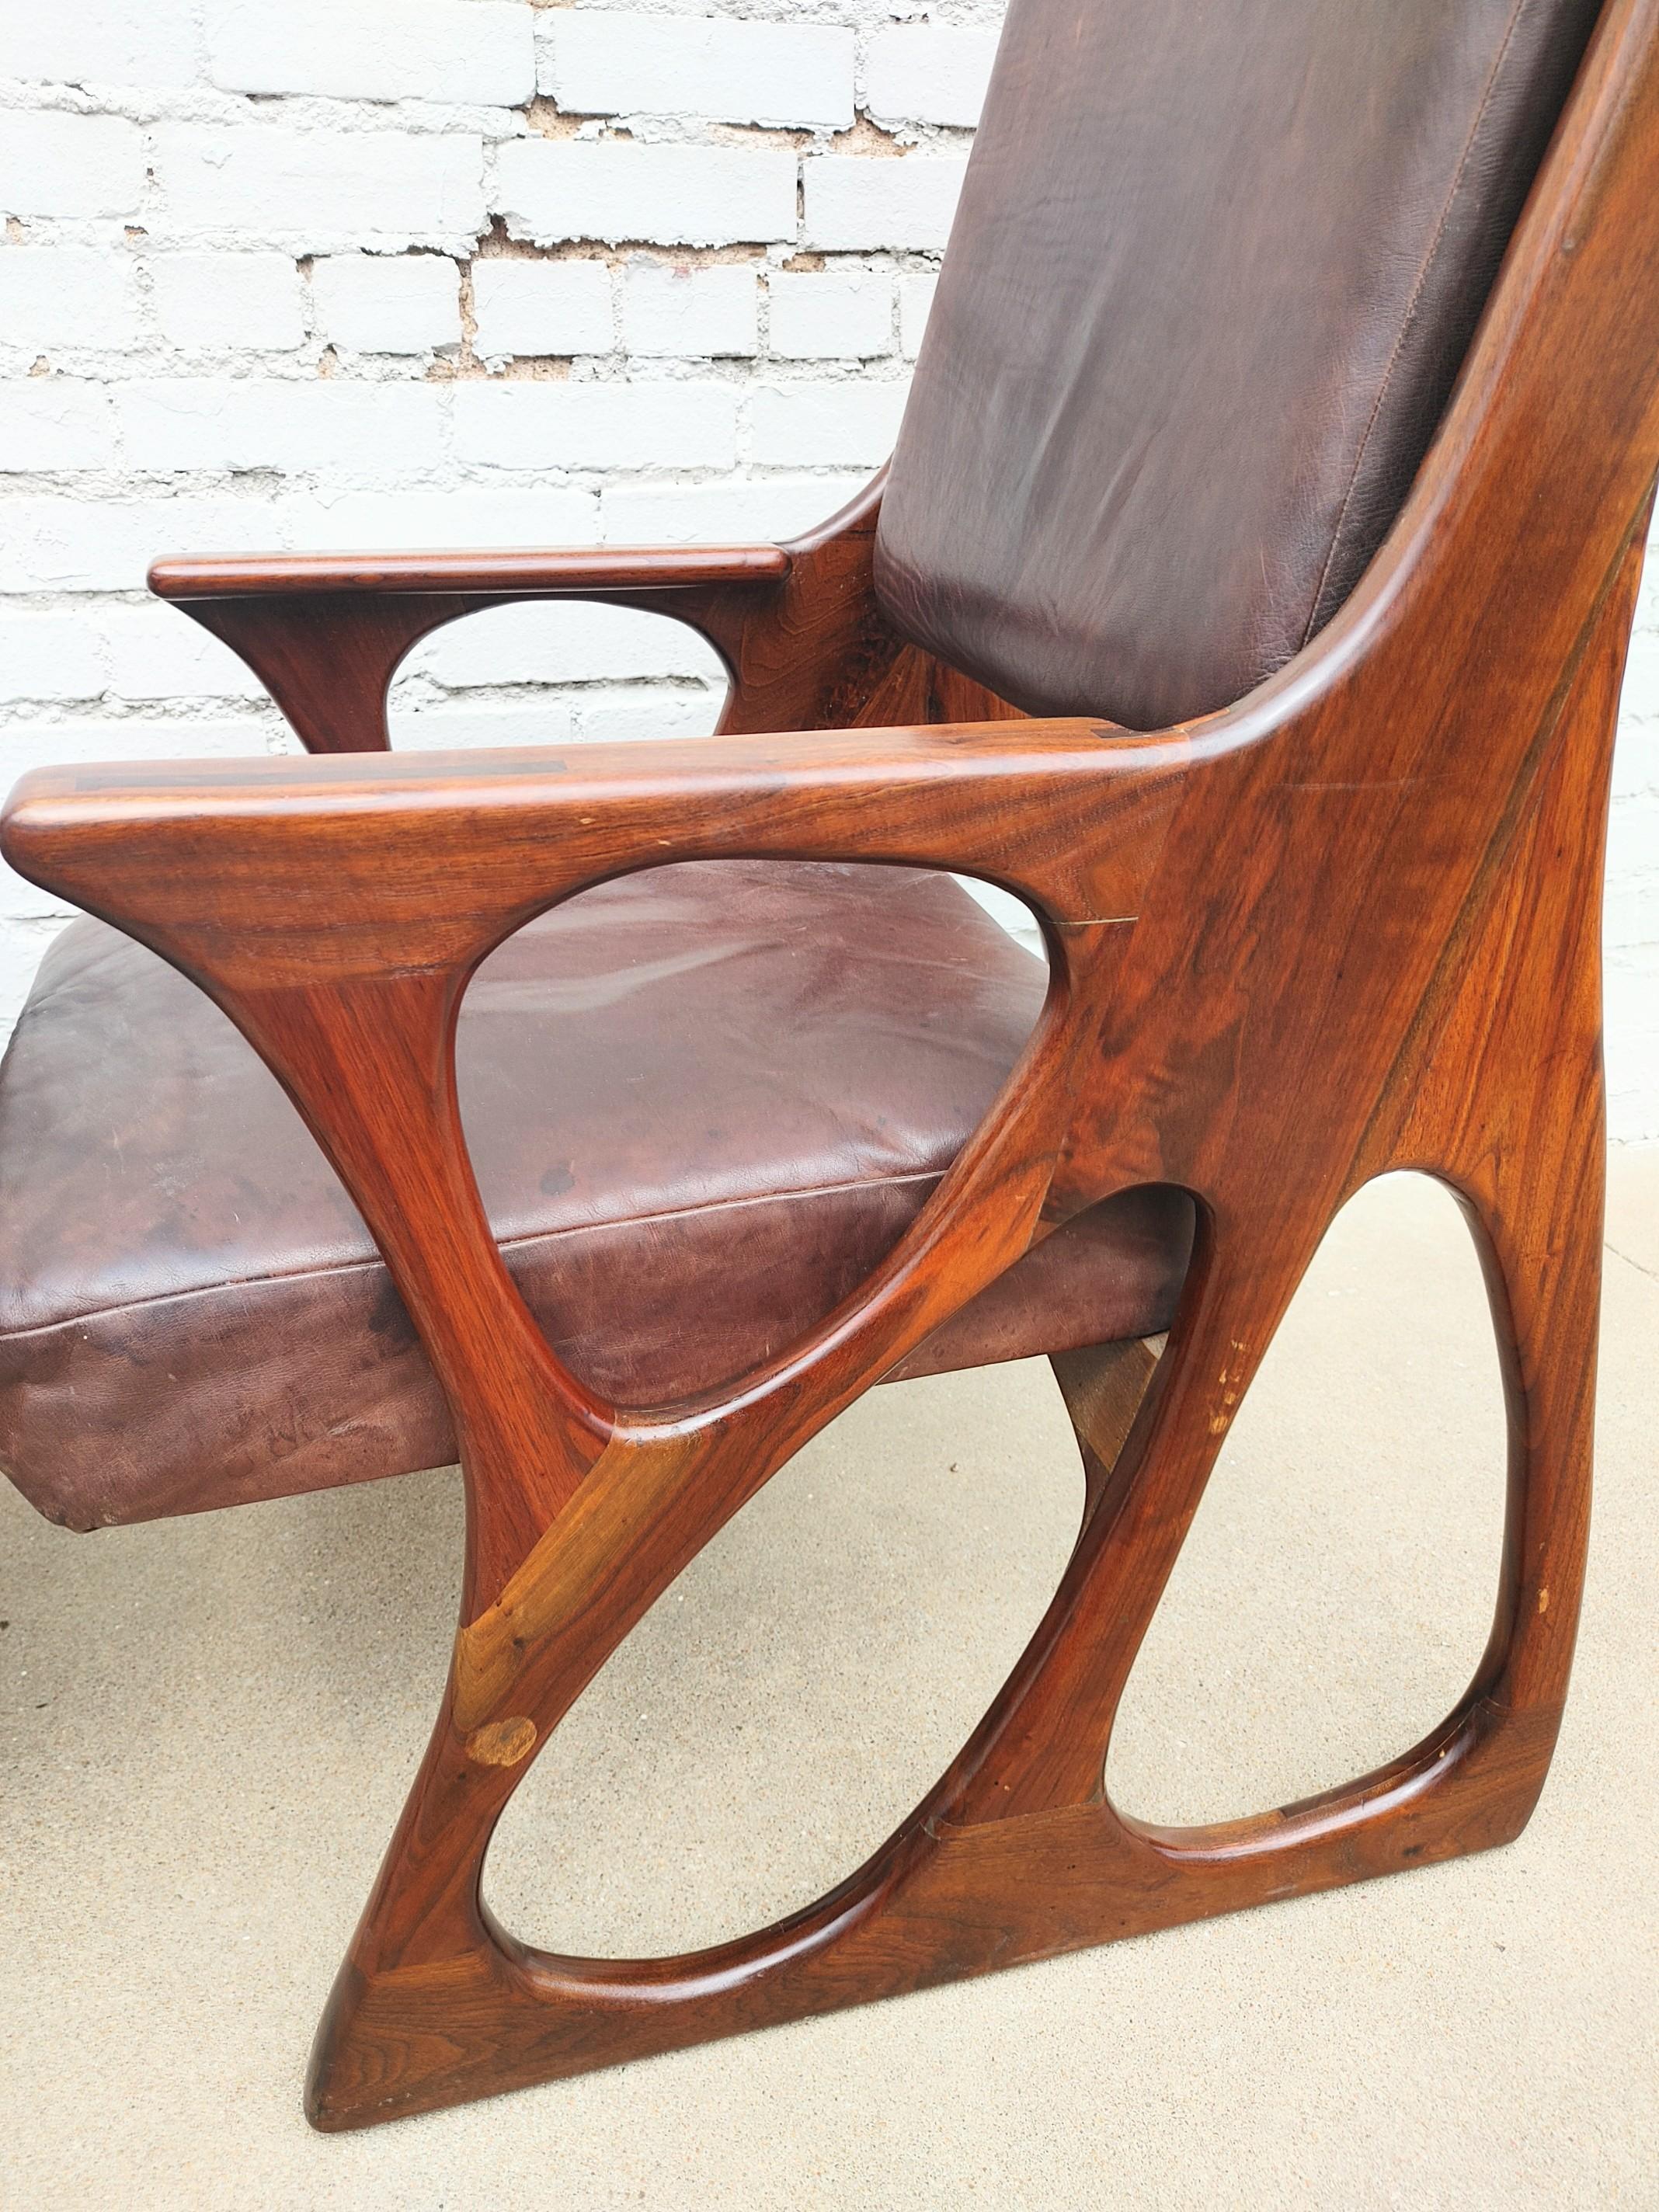 Joinery American Studio Craft Wendell Castle Inspired Chairs For Sale